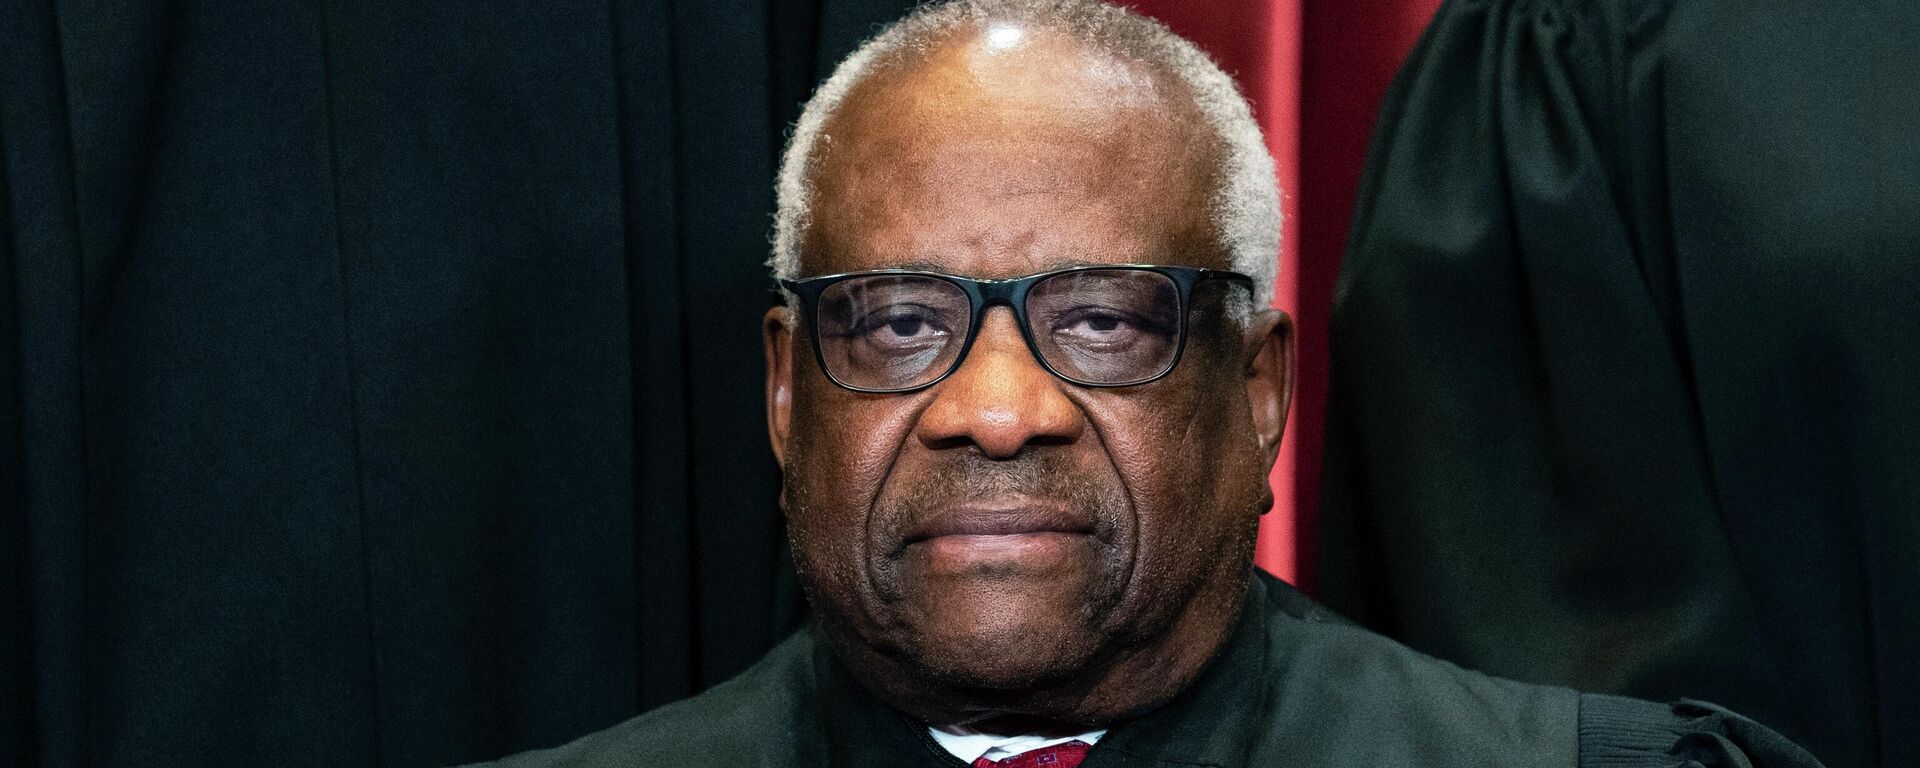 Justice Clarence Thomas sits during a group photo at the Supreme Court in Washington, on Friday, April 23, 2021. - Sputnik International, 1920, 02.10.2022